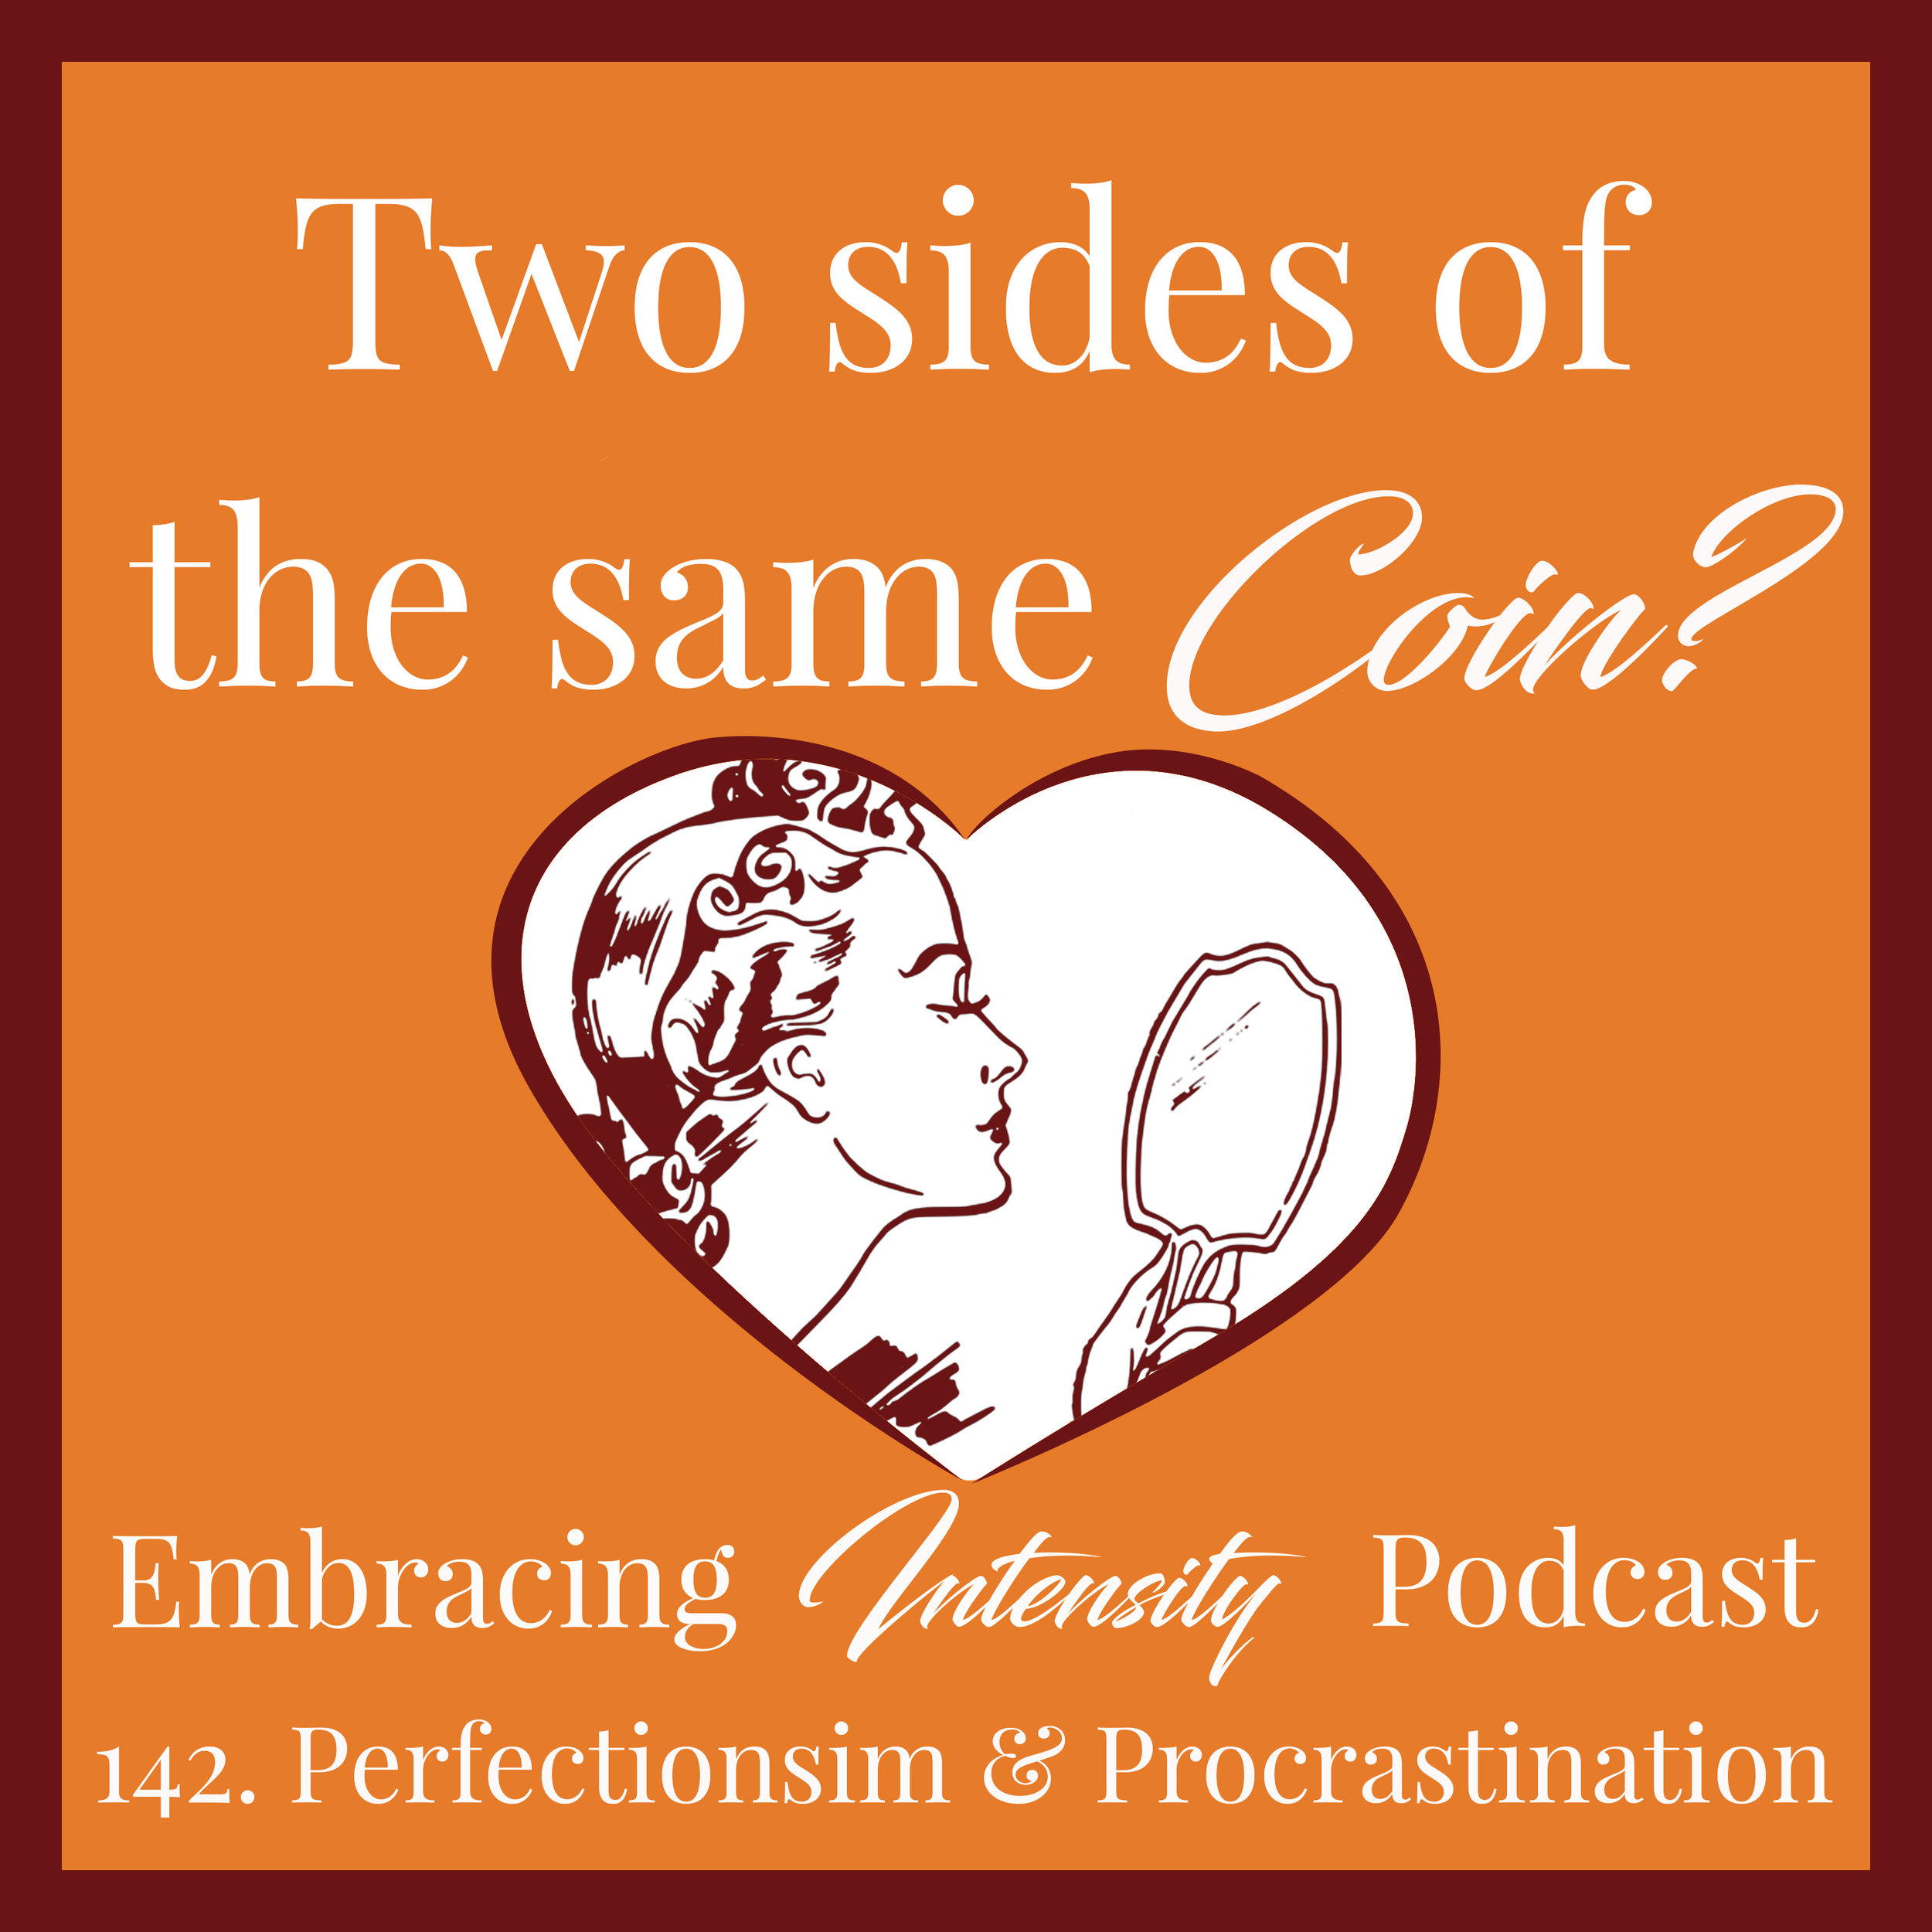 Perfectionism & Procrastination: Two sides of the same coin?